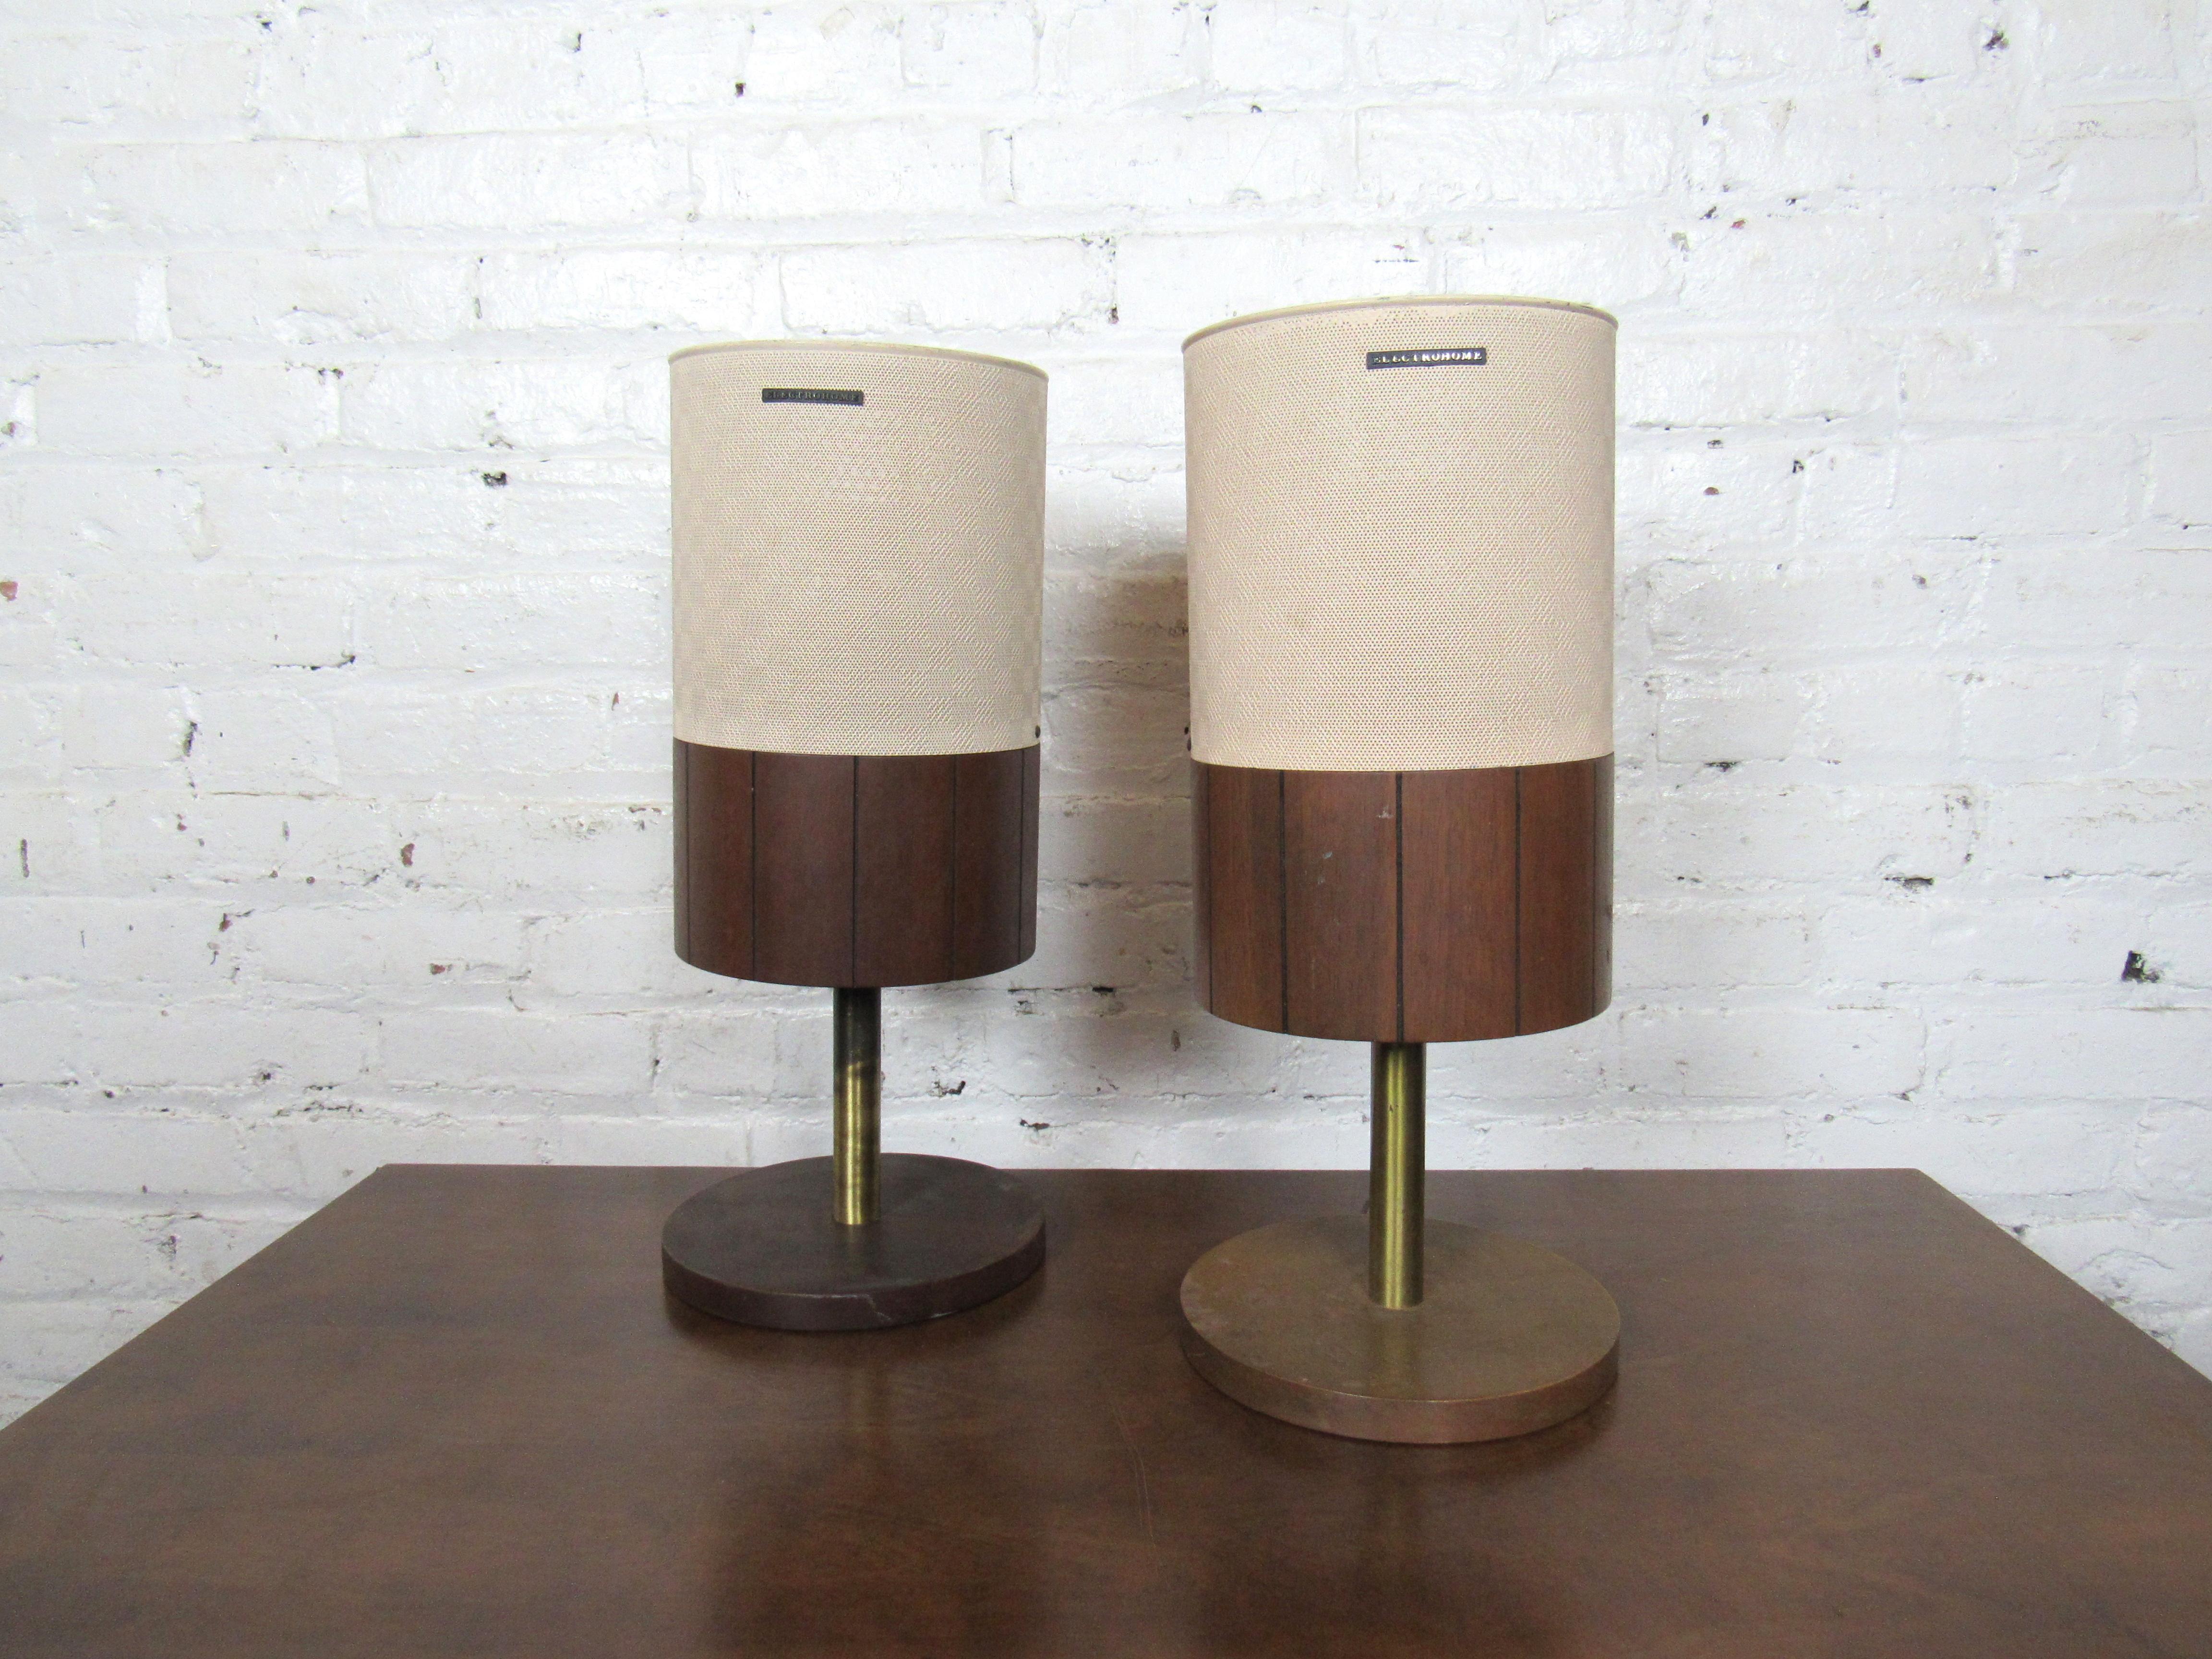 A pair of vintage midcentury speakers for connection to record players or other devices. With a base of brass and walnut, these speakers add authenticity to any vintage record player setup. Made by Dominion Electrohome Industries Ltd. Canada.